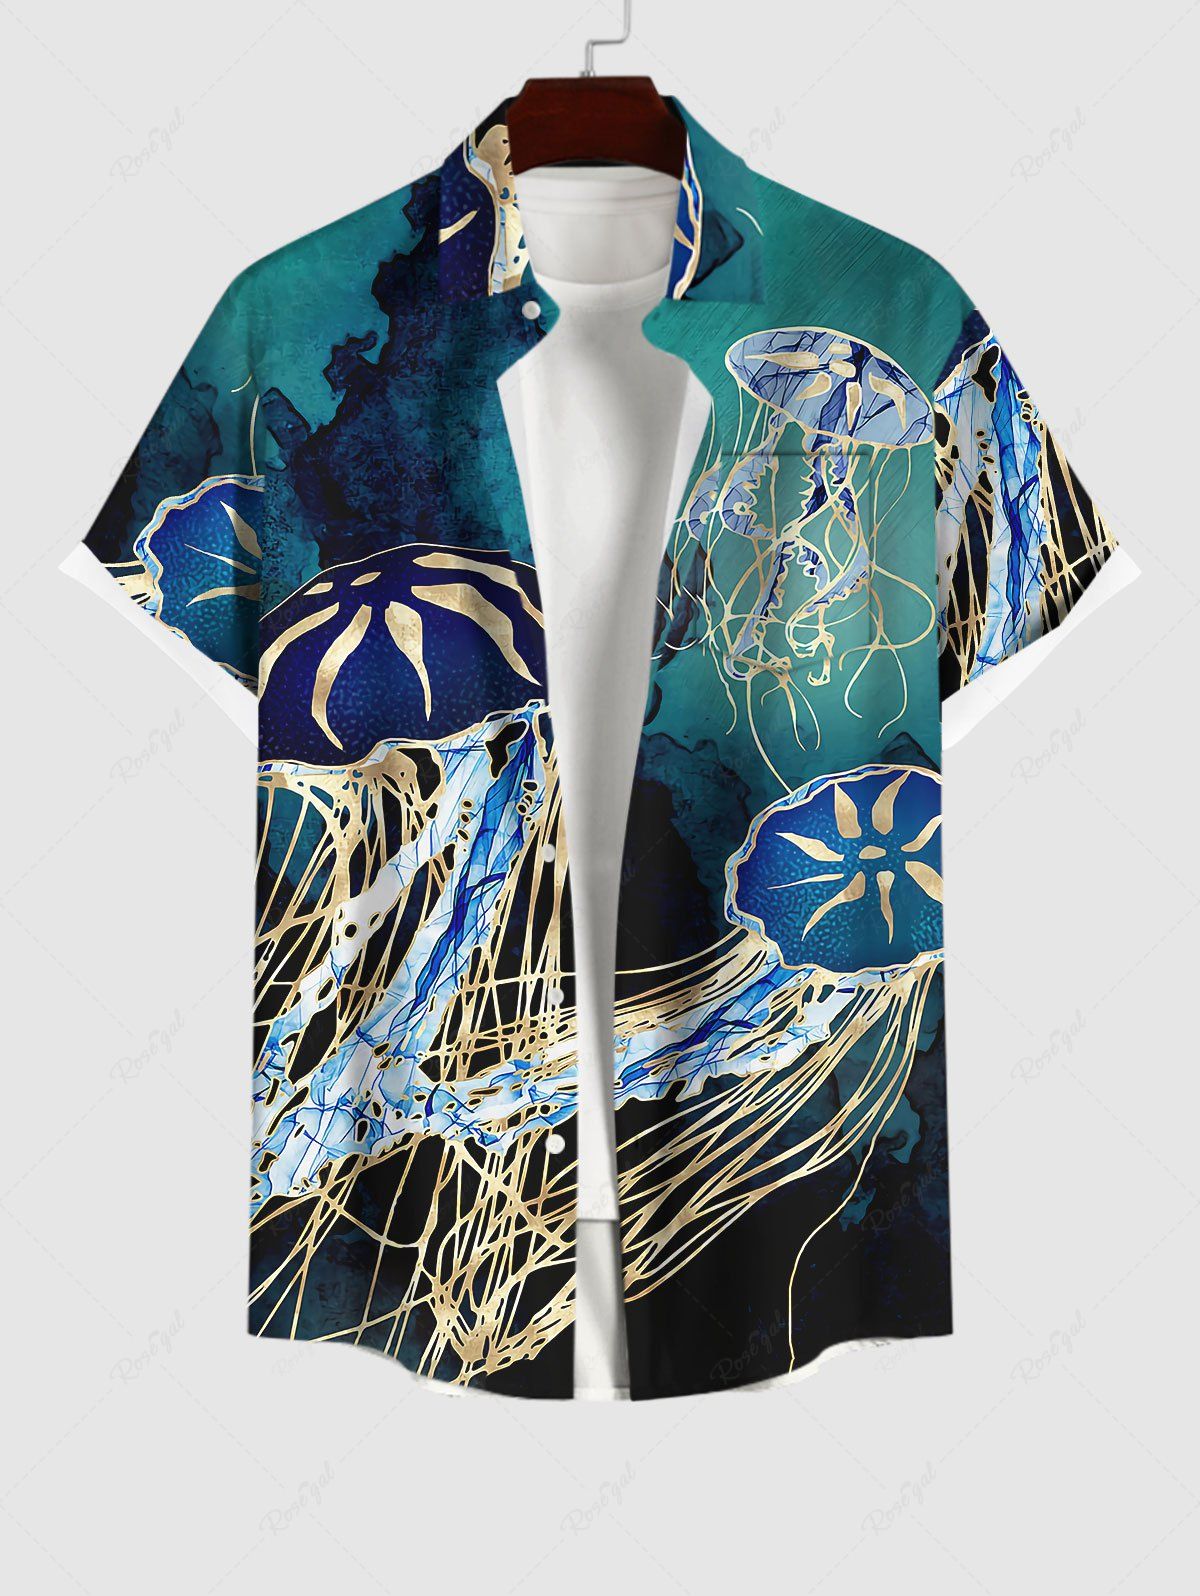 Hawaii Plus Size Sea Creatures Underwater World Jellyfish Print Buttons Pocket Shirt For Men Multi-A 4XL